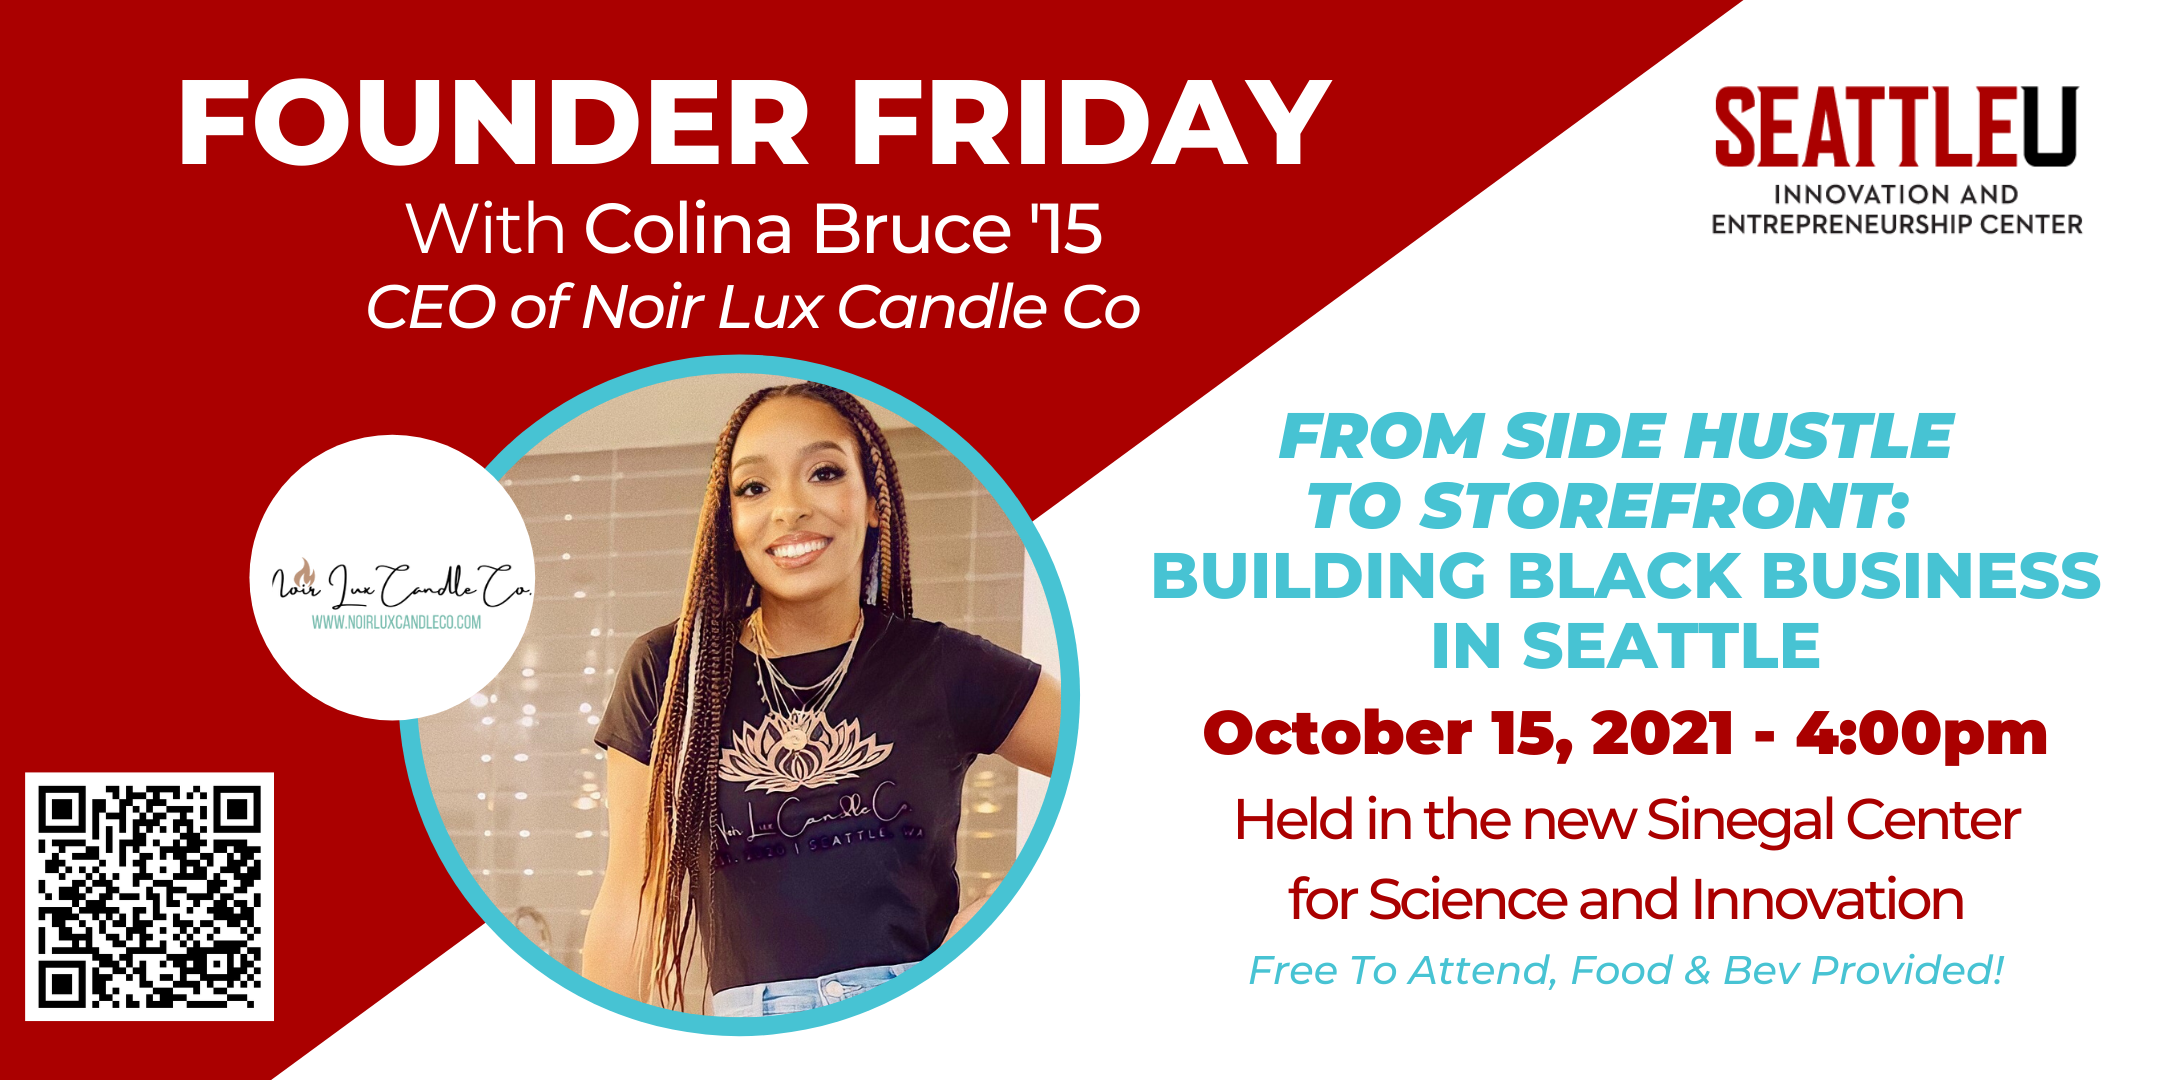 Founder Friday with Colina Bruce, CEO of Noir Lux Candle Co